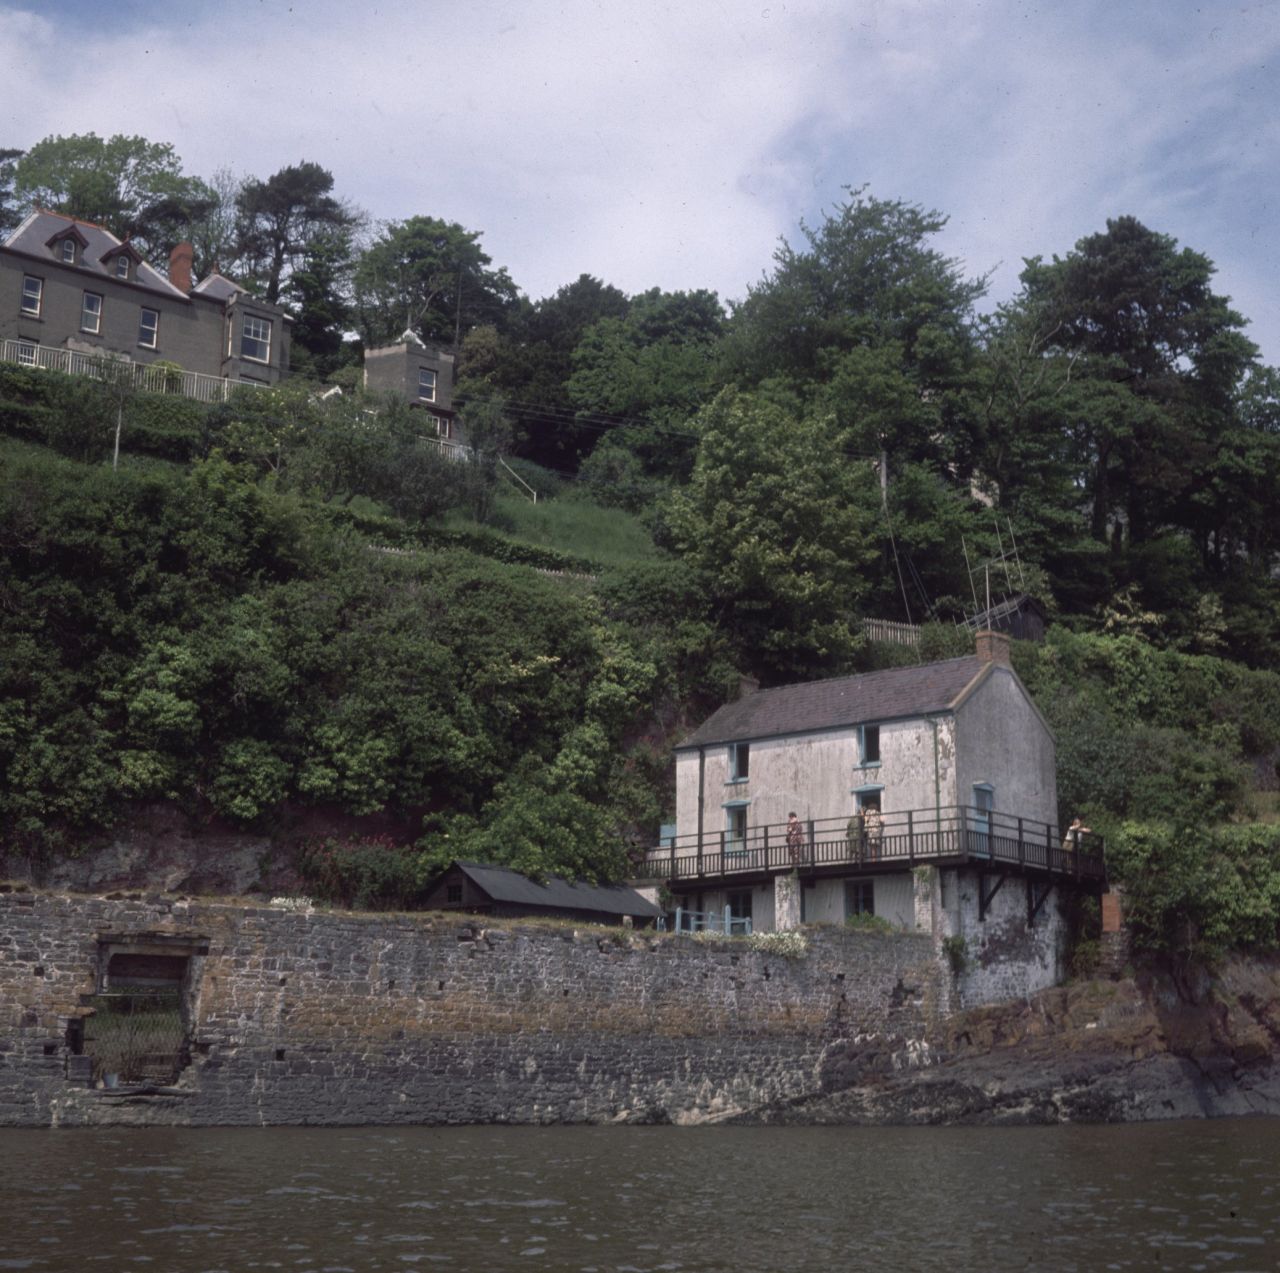 Dylan's home, the Boathouse at Laugharne (seen here in 1969), is now a <a href="http://www.dylanthomasboathouse.com/" target="_blank" target="_blank">museum dedicated to his life and work</a>.